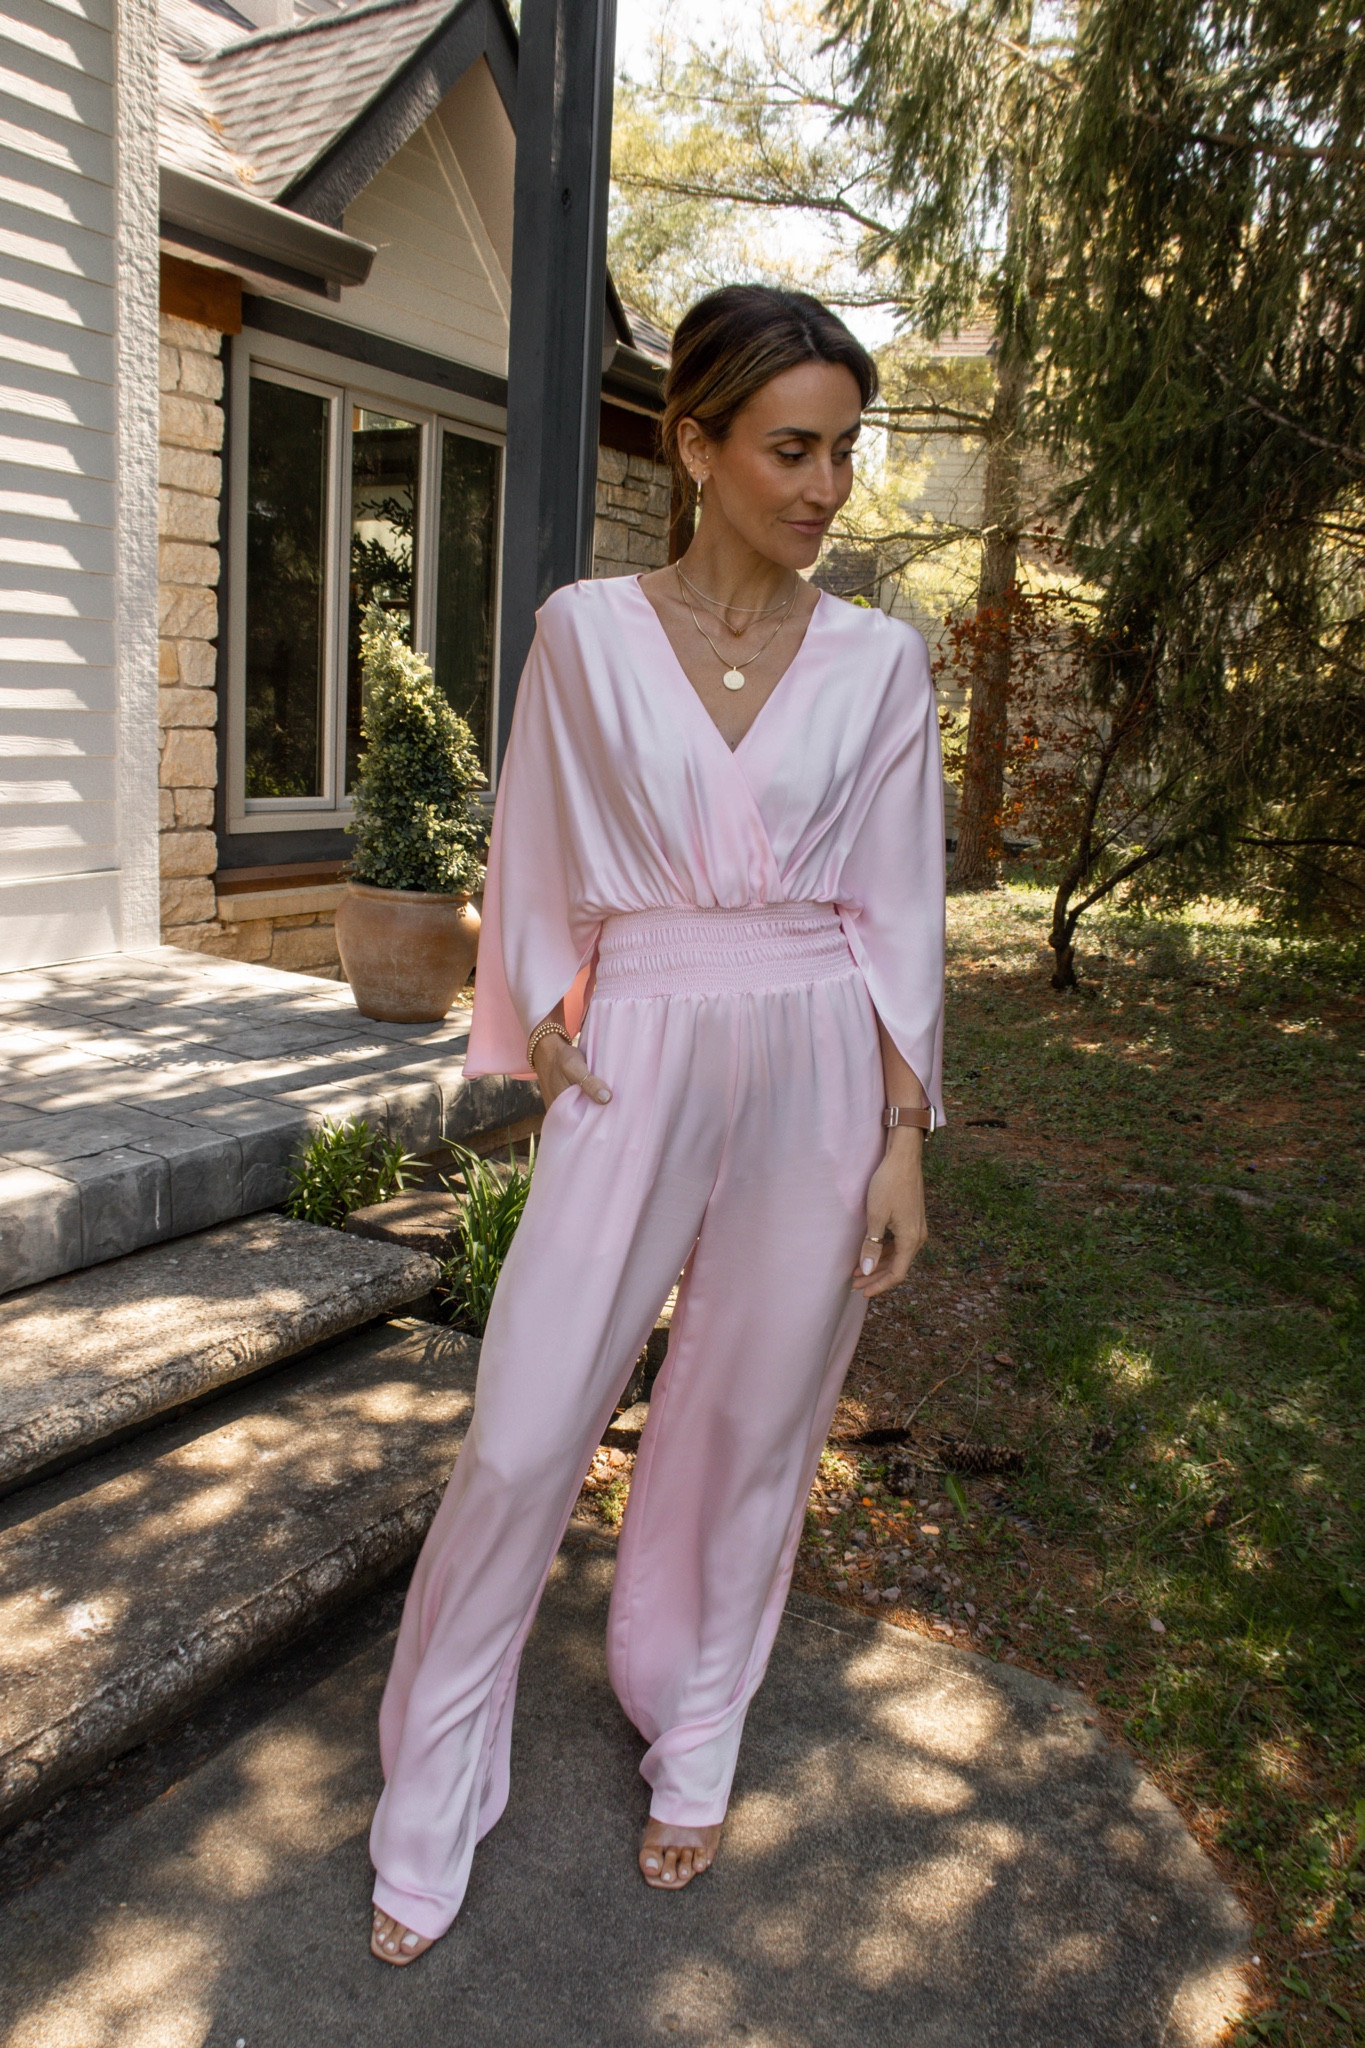 5 Wedding Guest Outfit Ideas - Karina Style Diaries